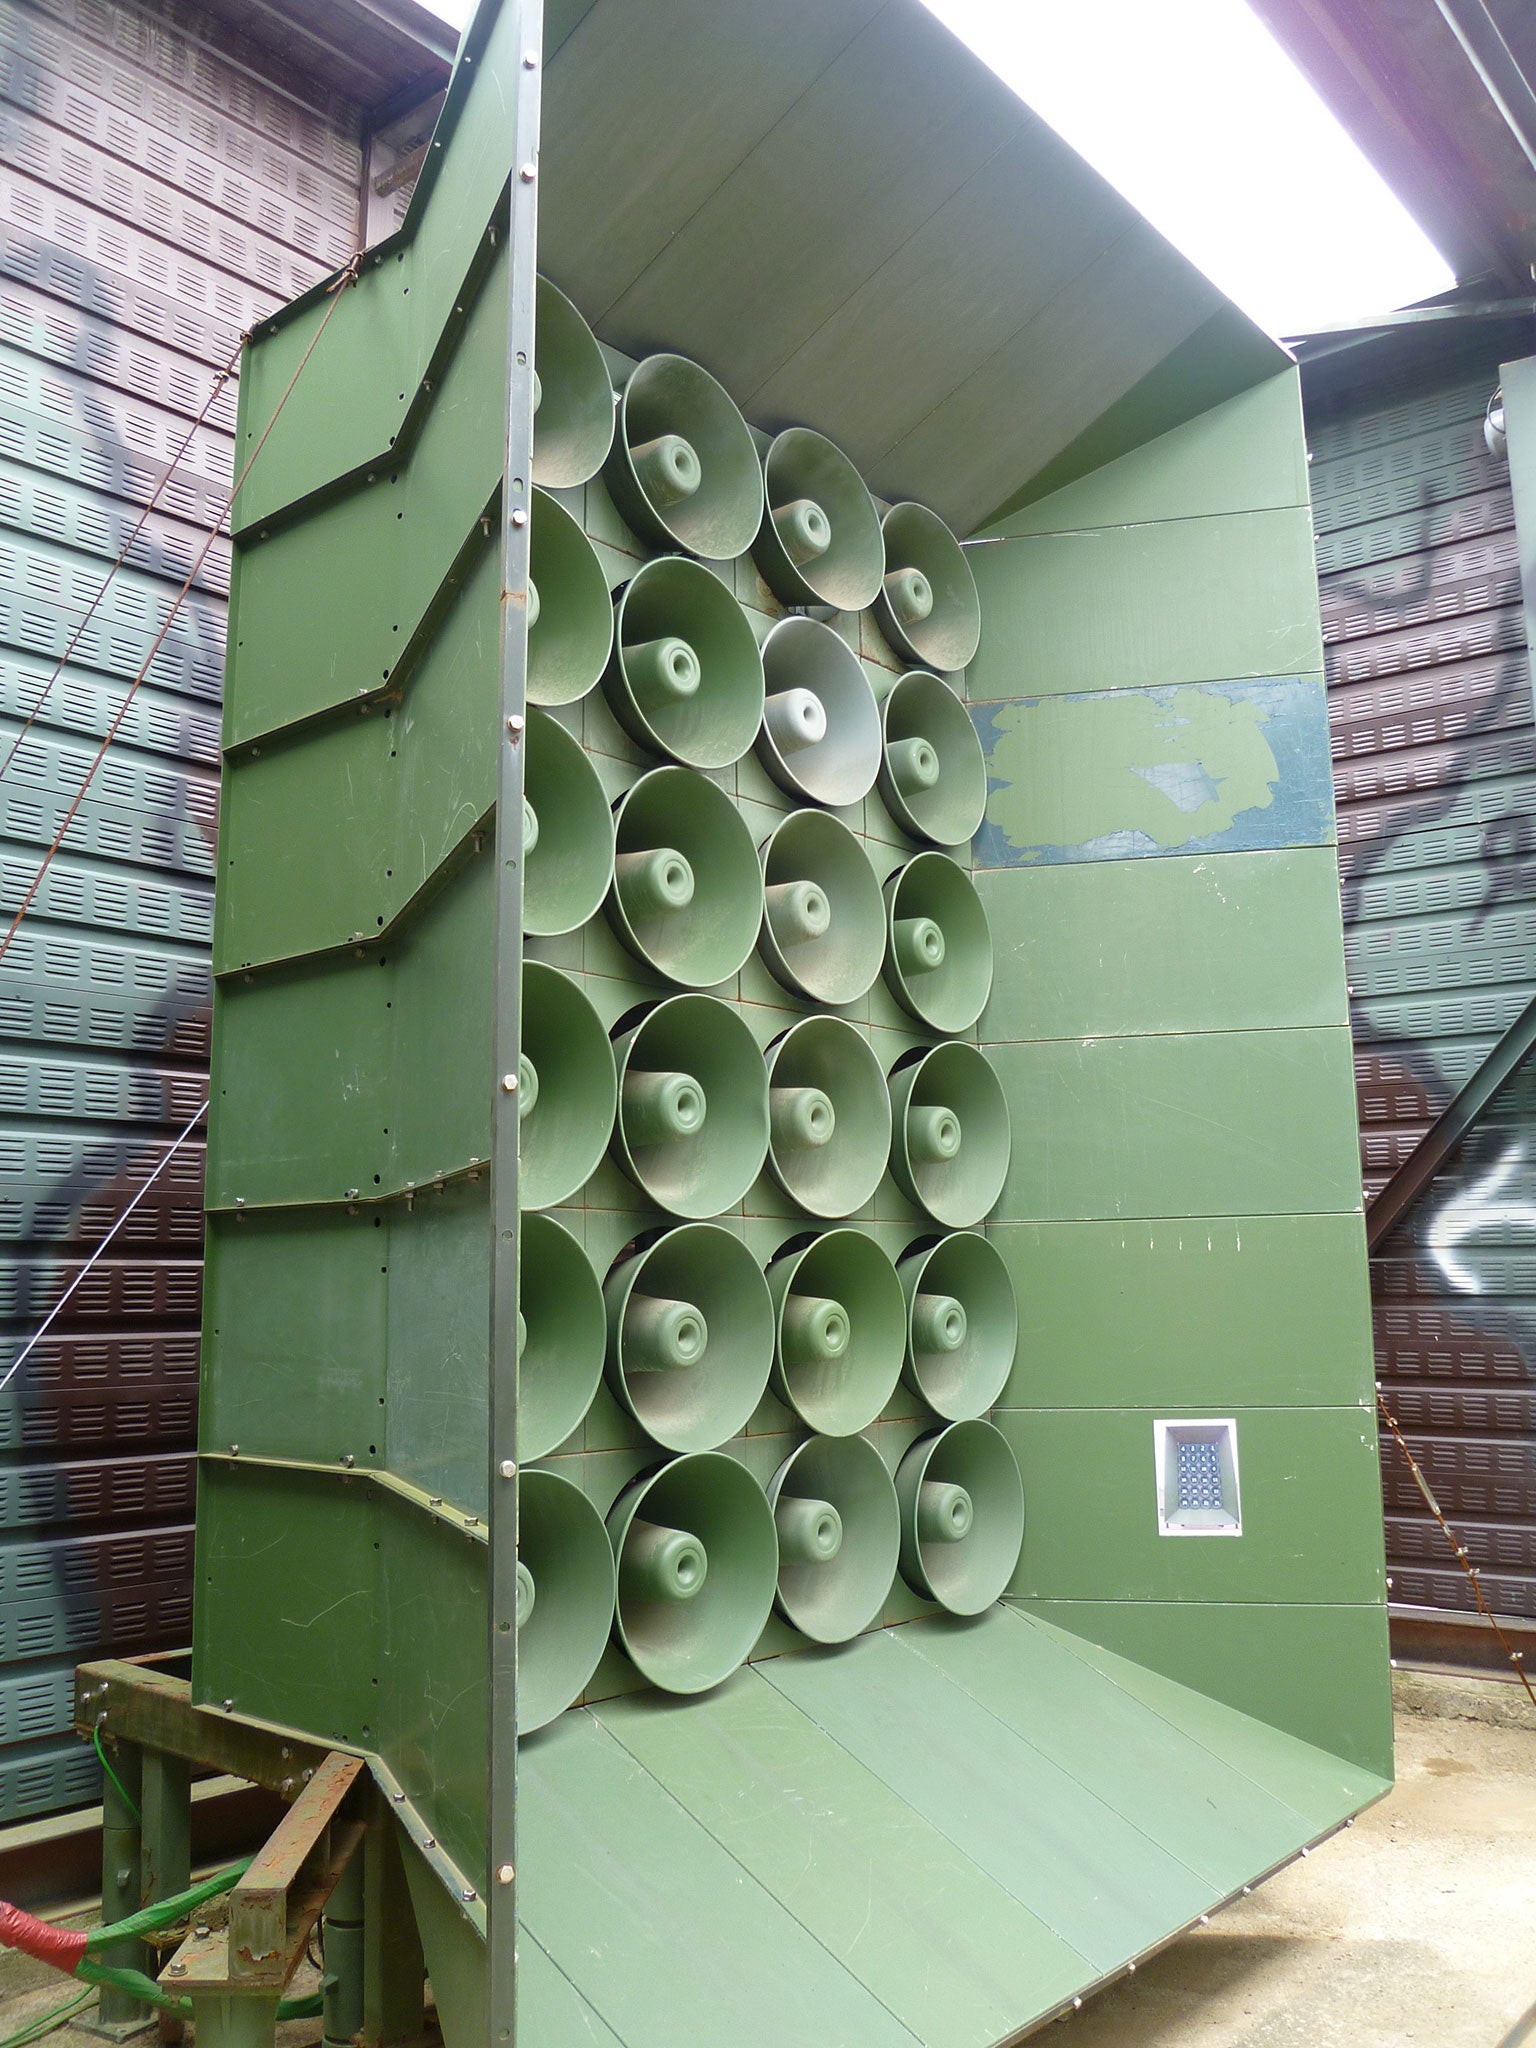 Loudspeakers installed by South Korea along the DMZ